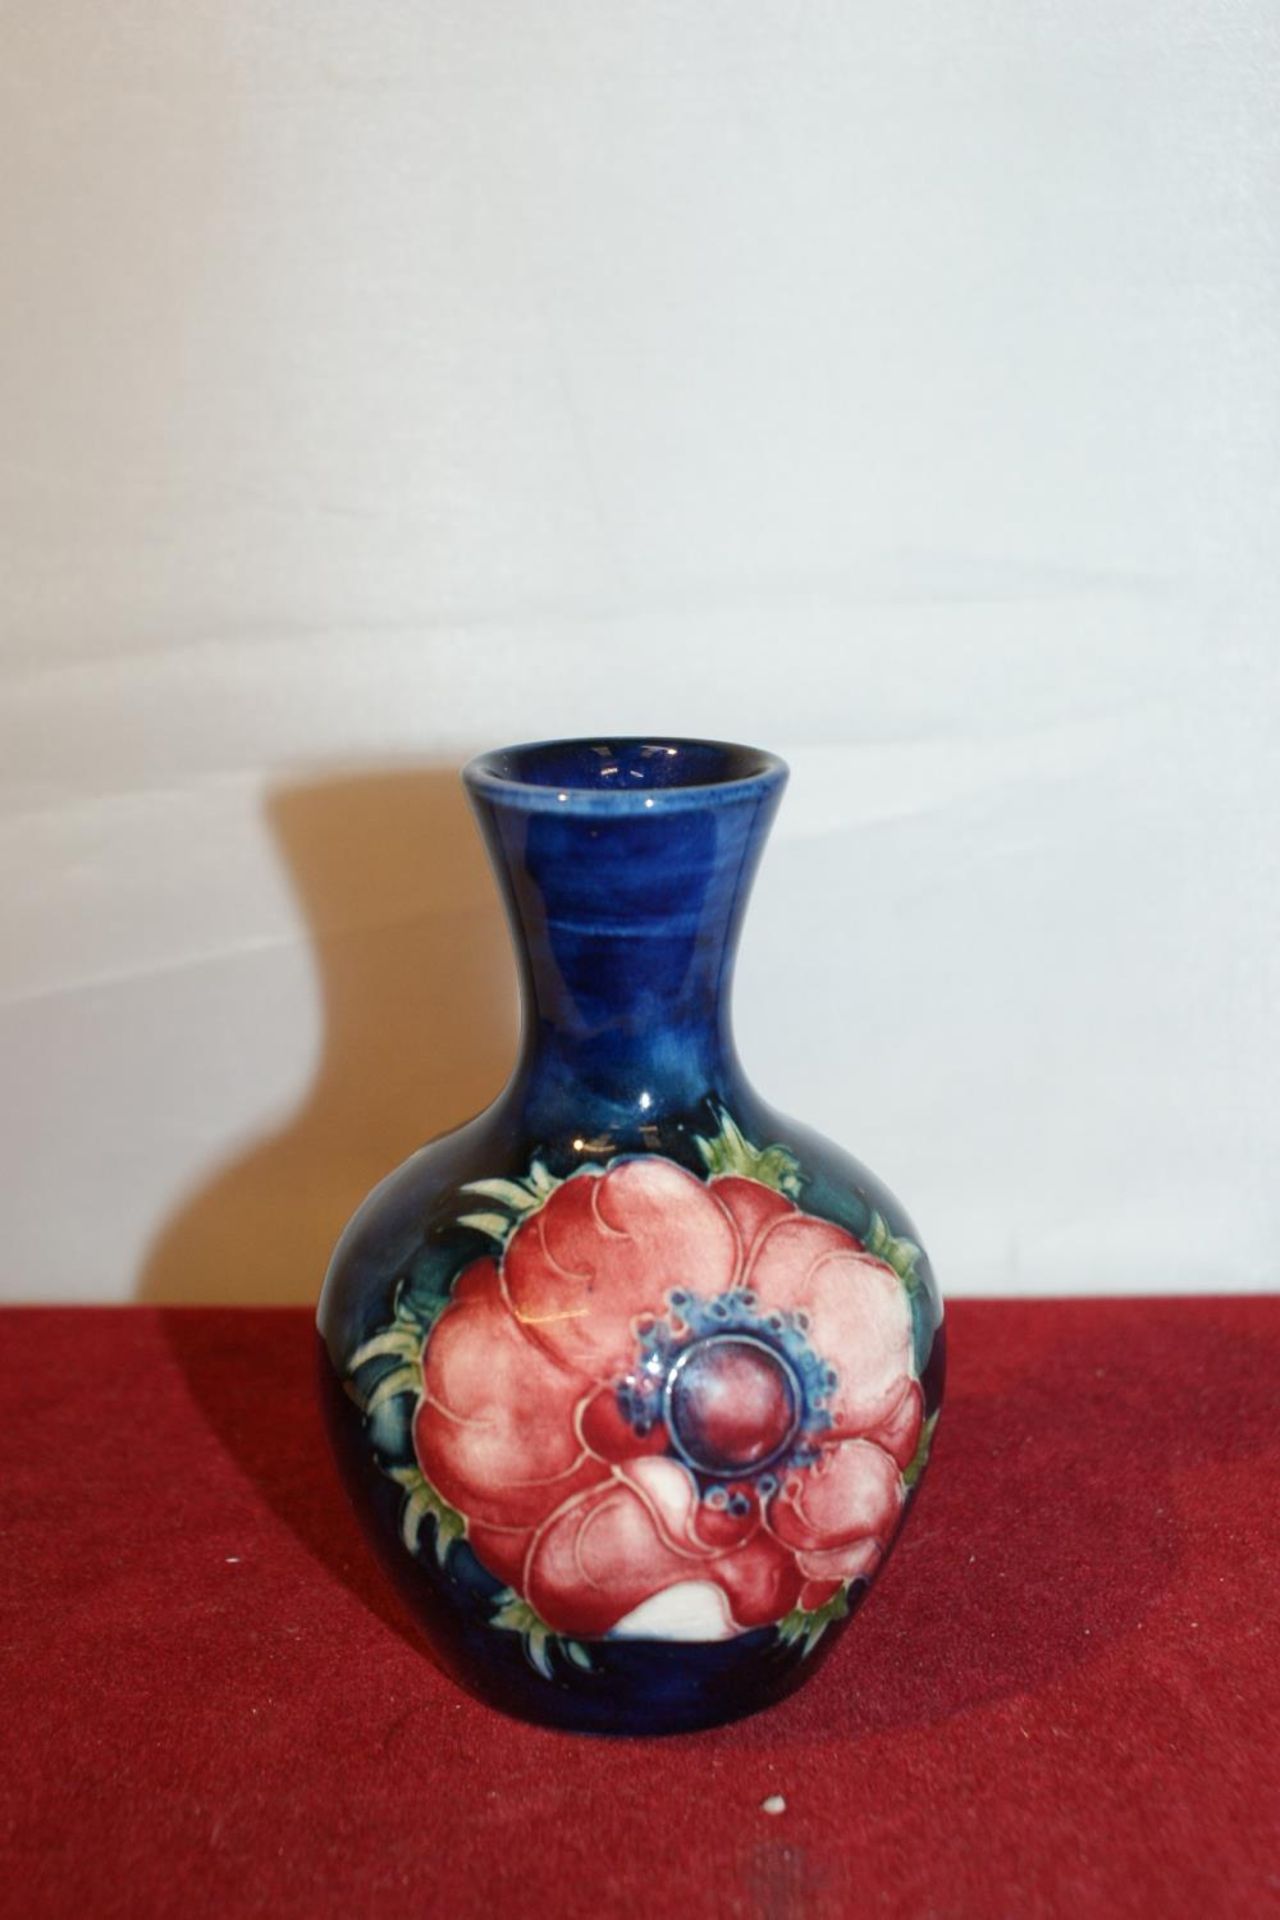 A MOORCROFT ANEMONE VASE 3.5 INCHES HIGH